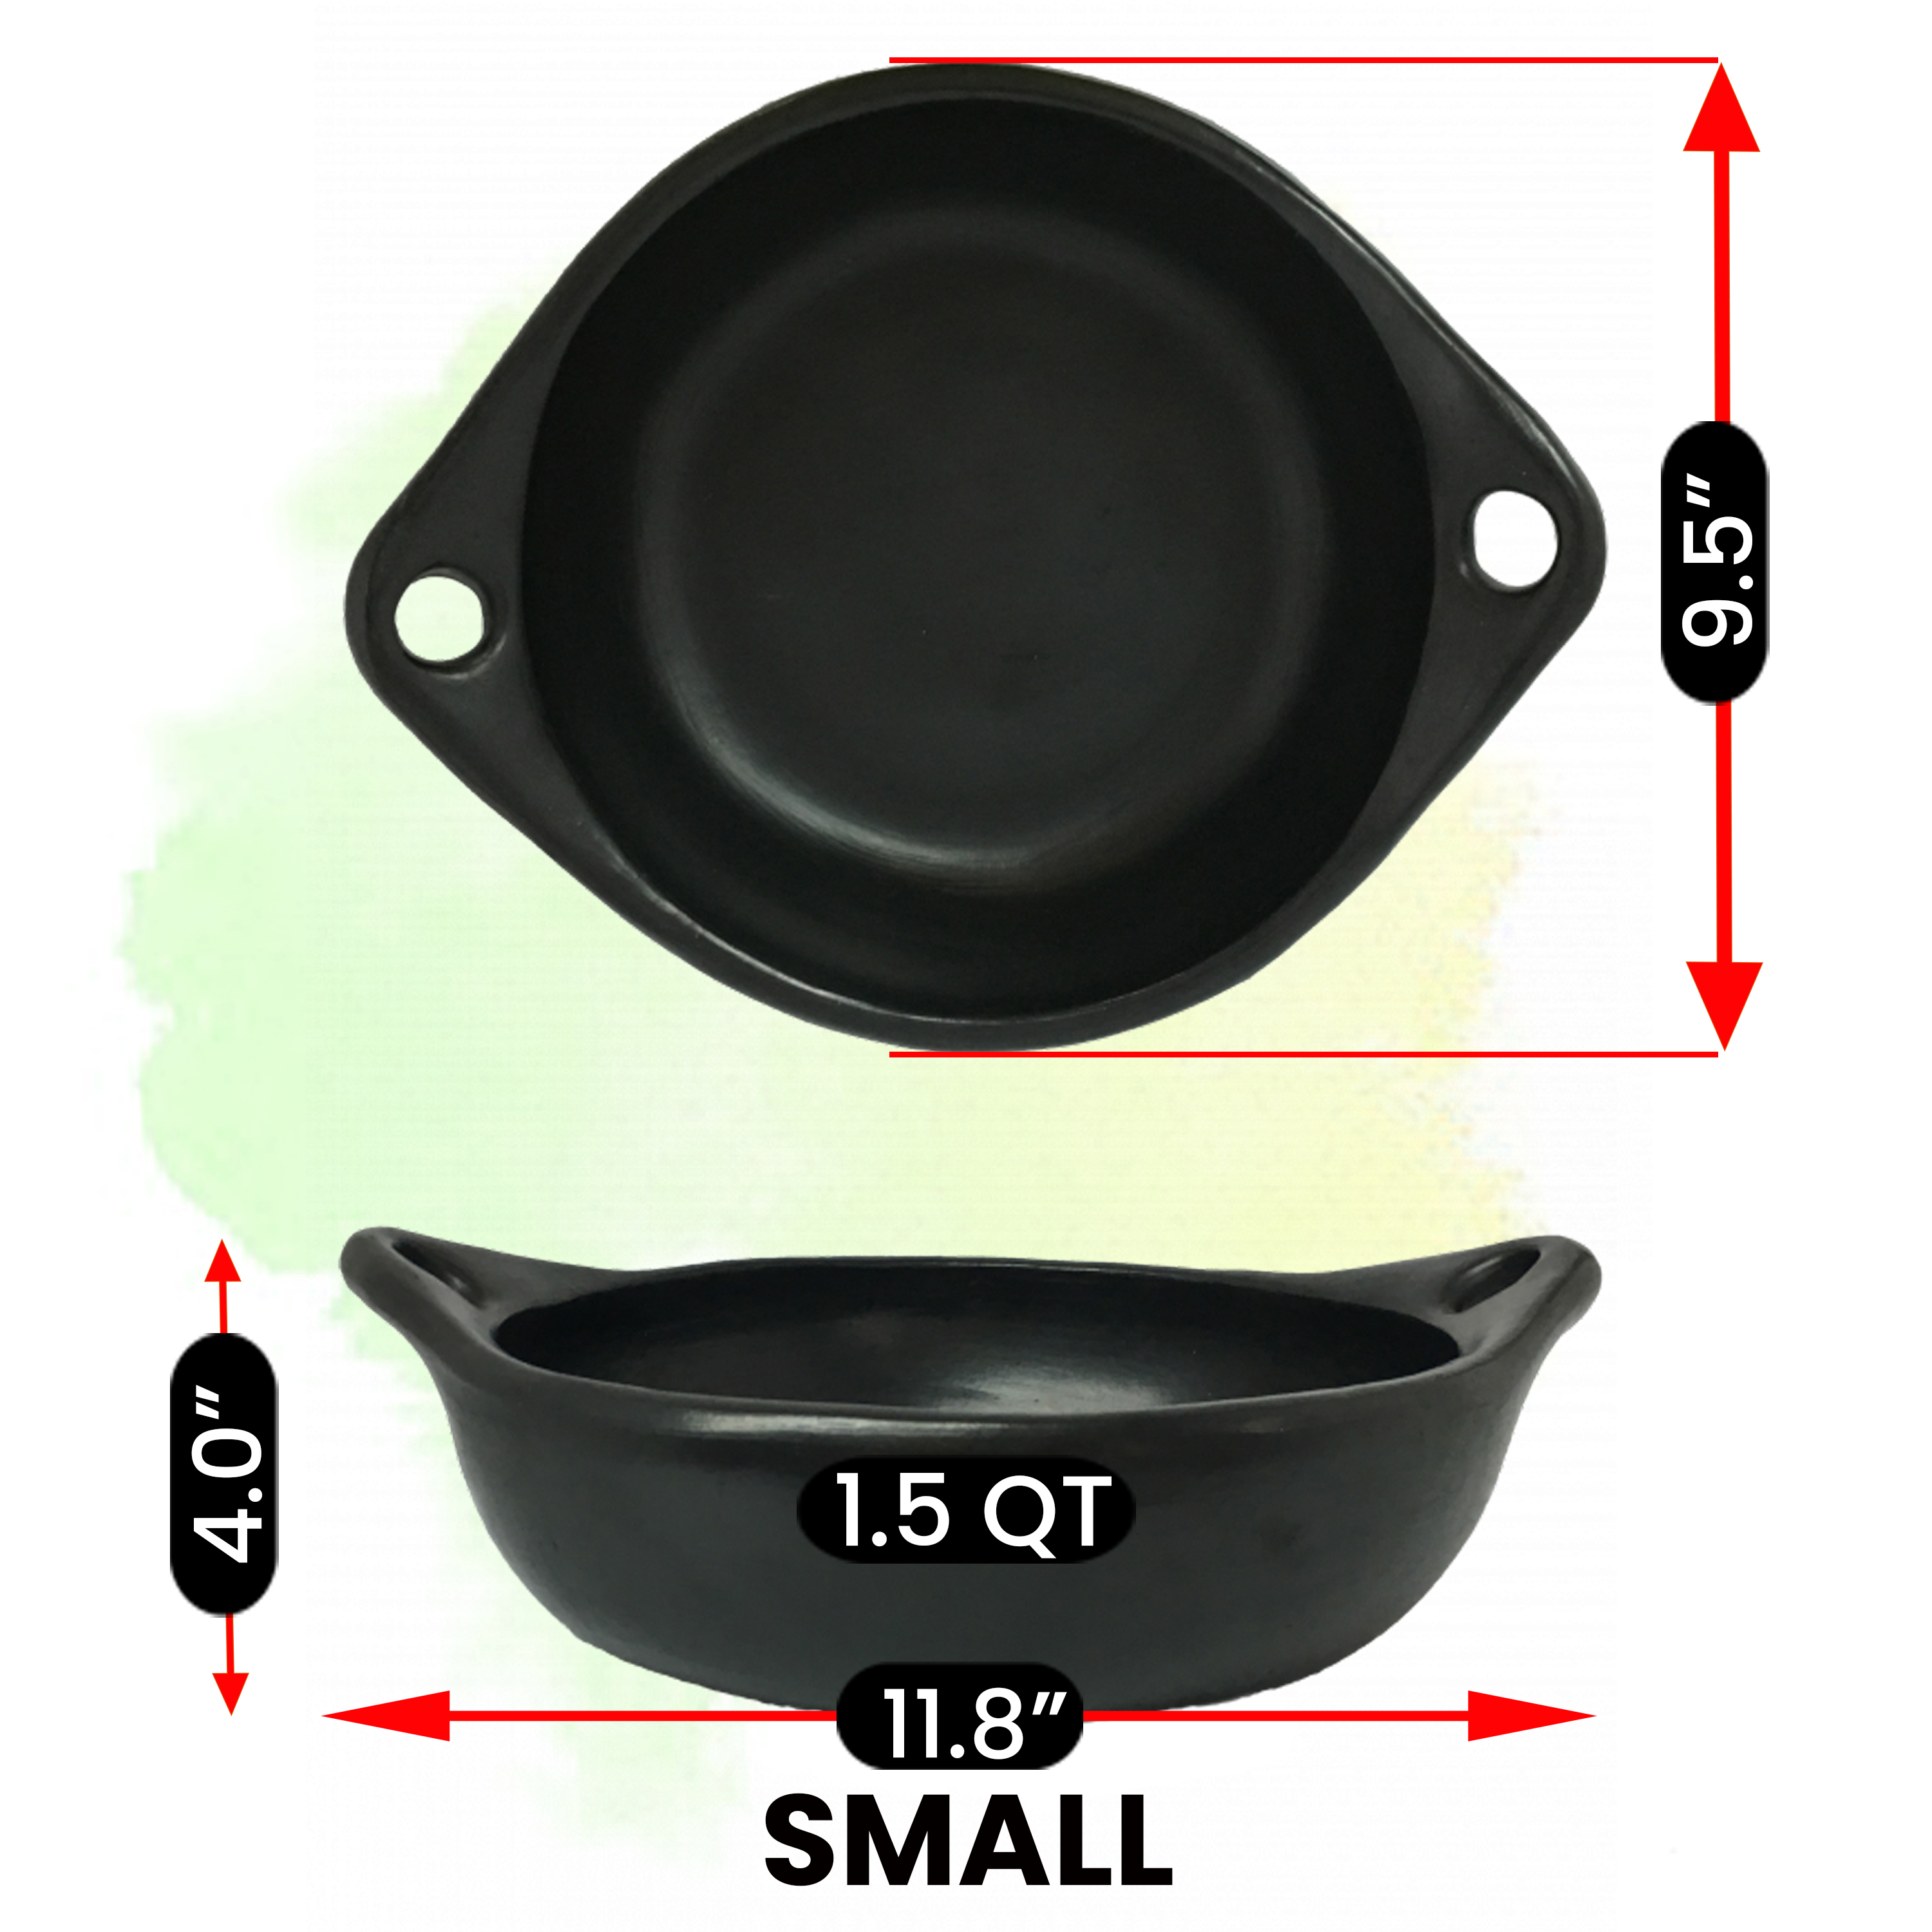 https://ancientcookware.com/images/stories/virtuemart/product/col_1040_12_Large_with_measurements.jpg